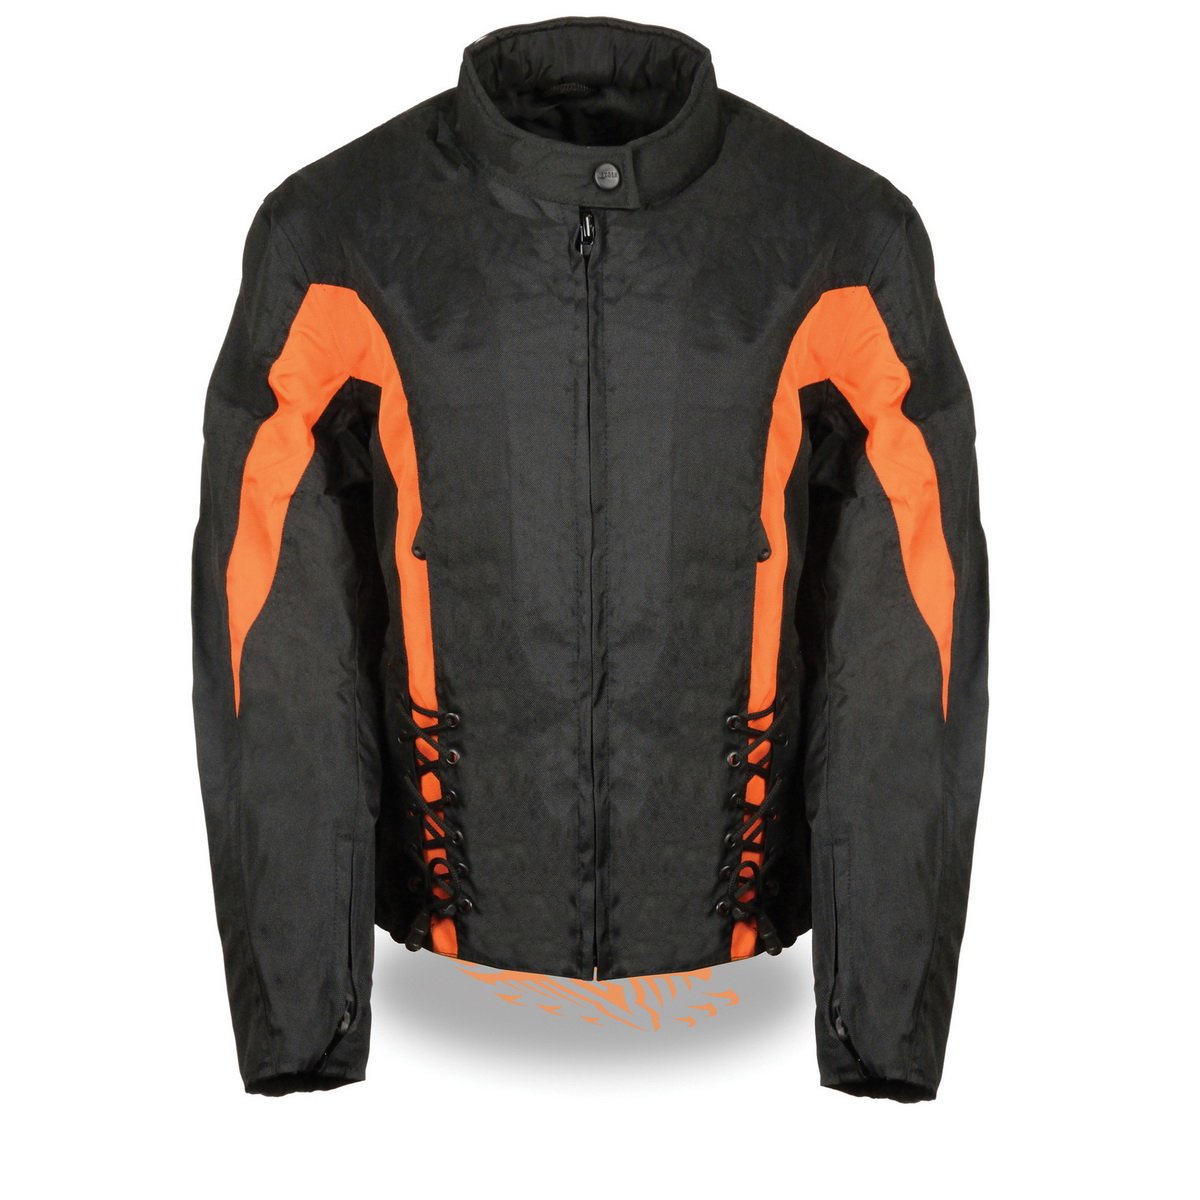 Nexgen SH2188 Women's Black and Orange Textile Motorcycle Riding Jacket with Side Stretch and Lacing